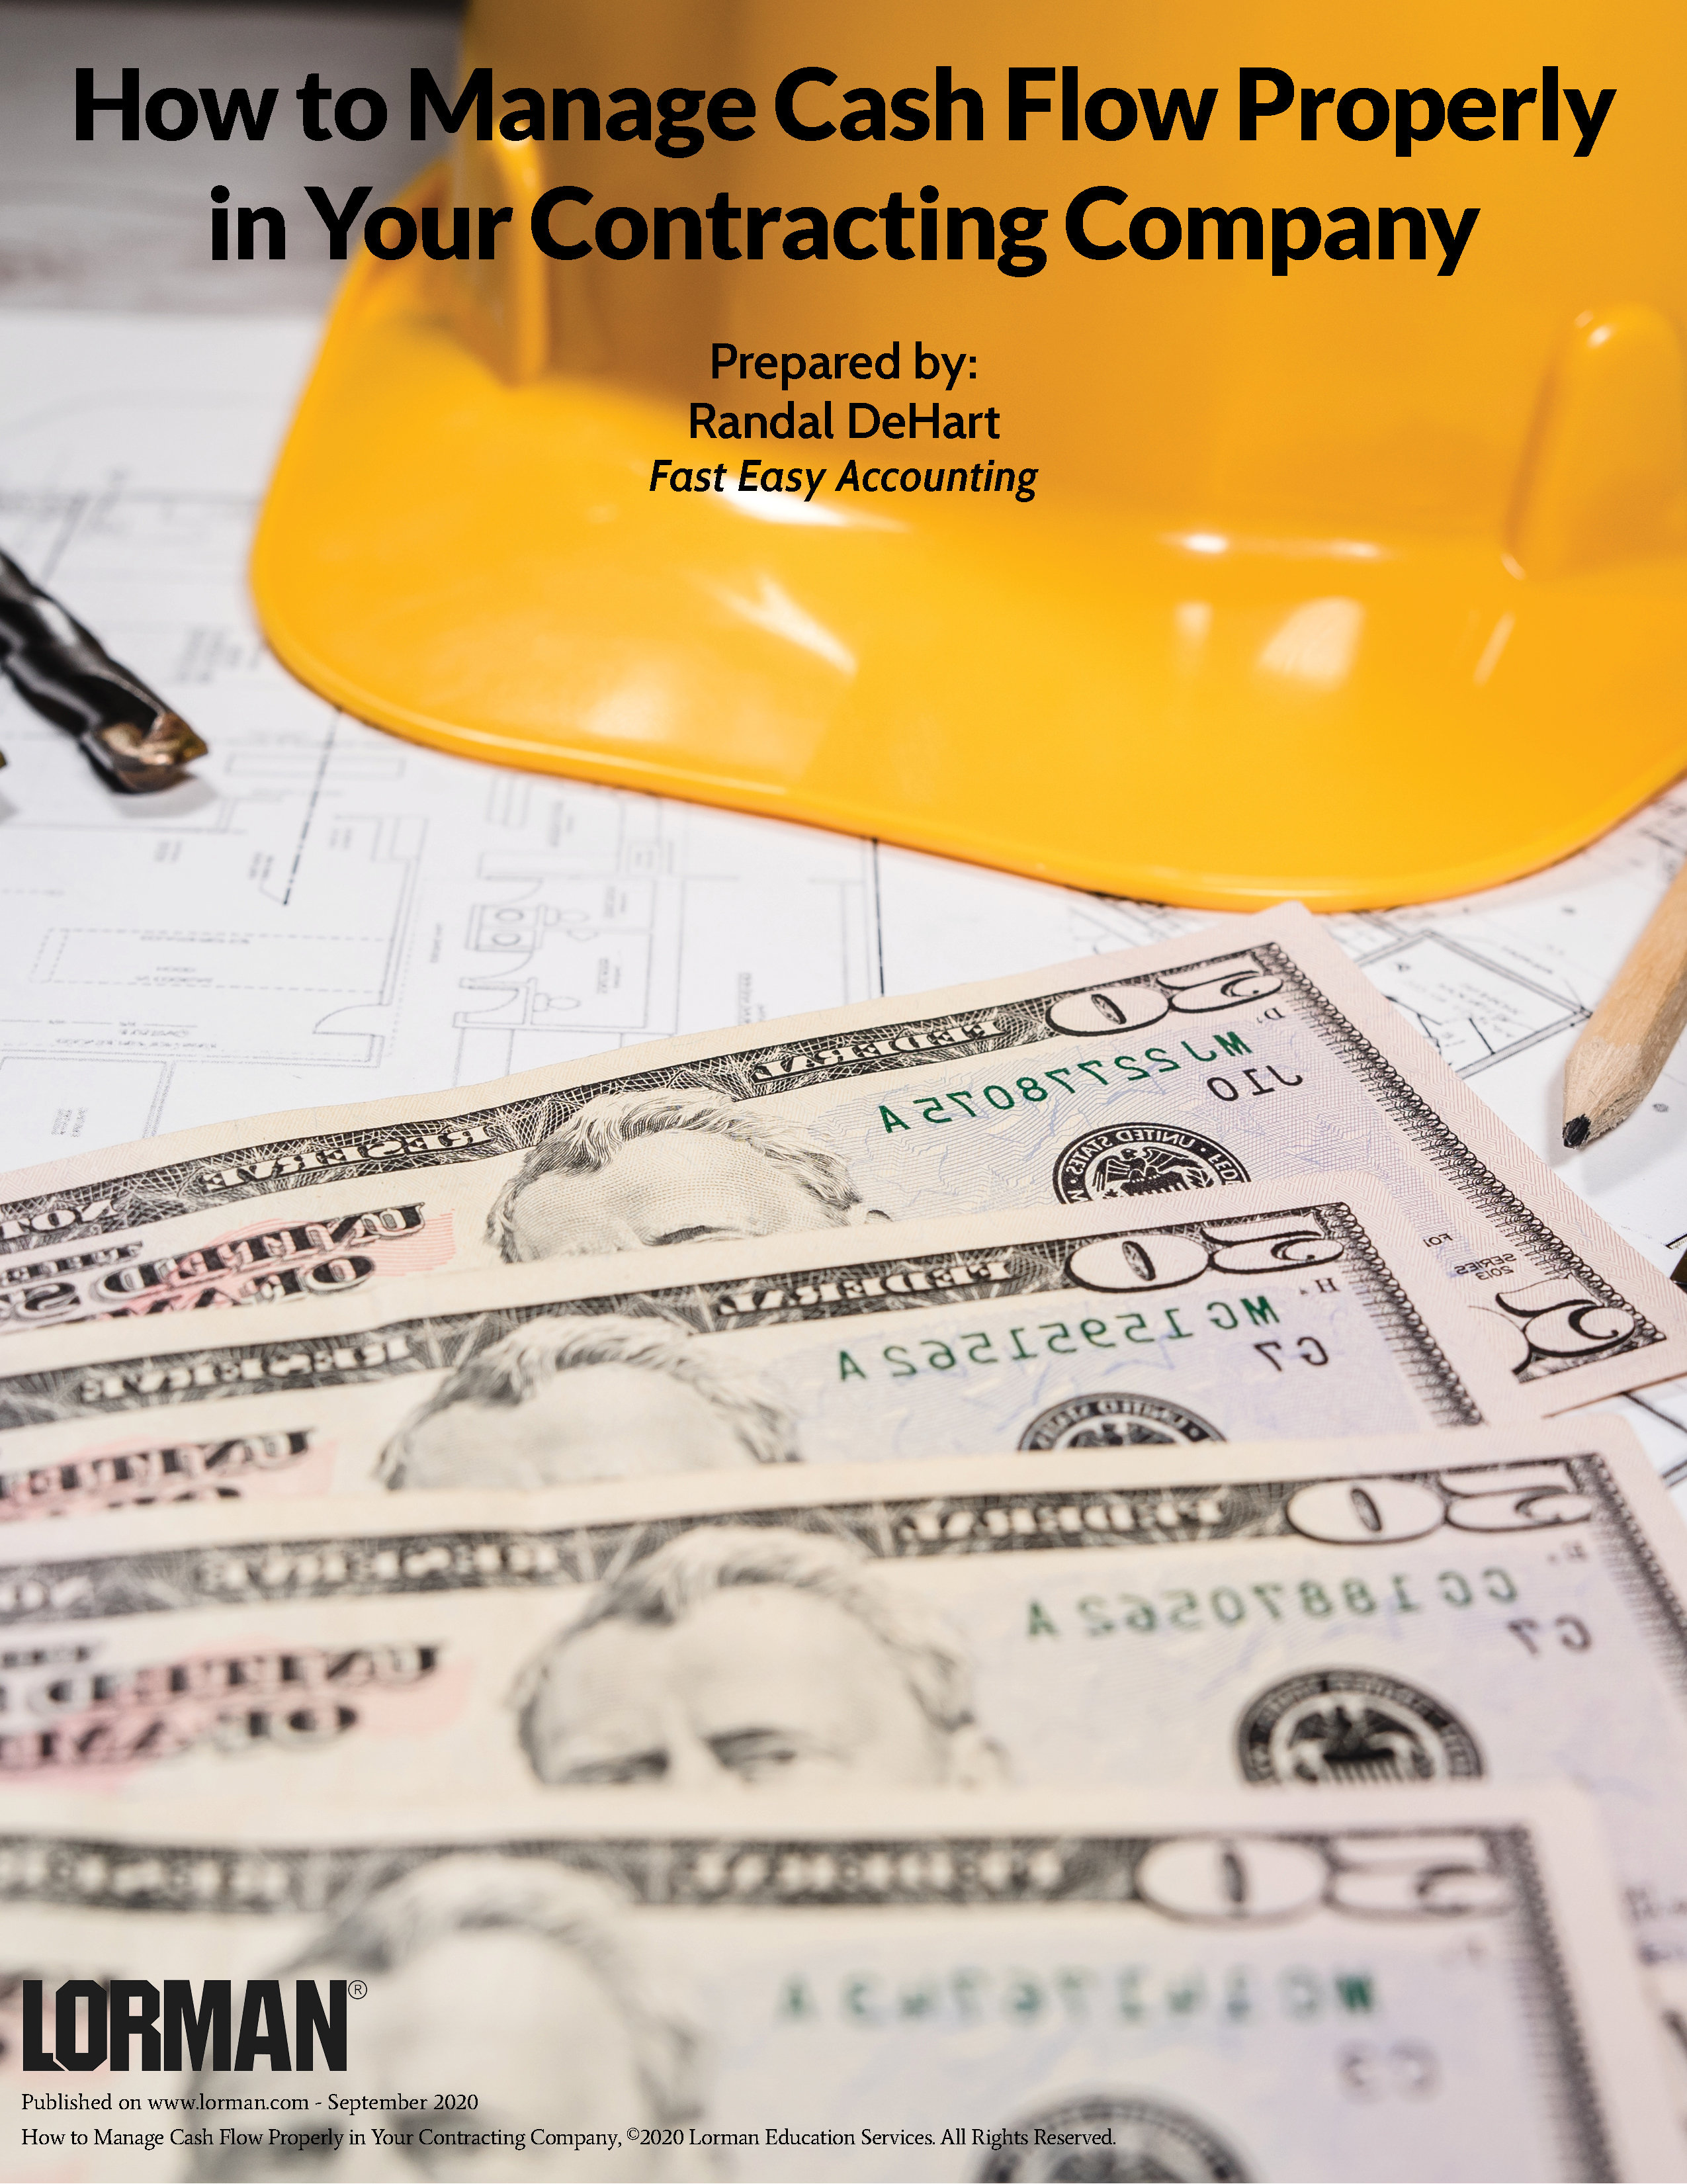 How to Manage Cash Flow Properly in Your Contracting Company